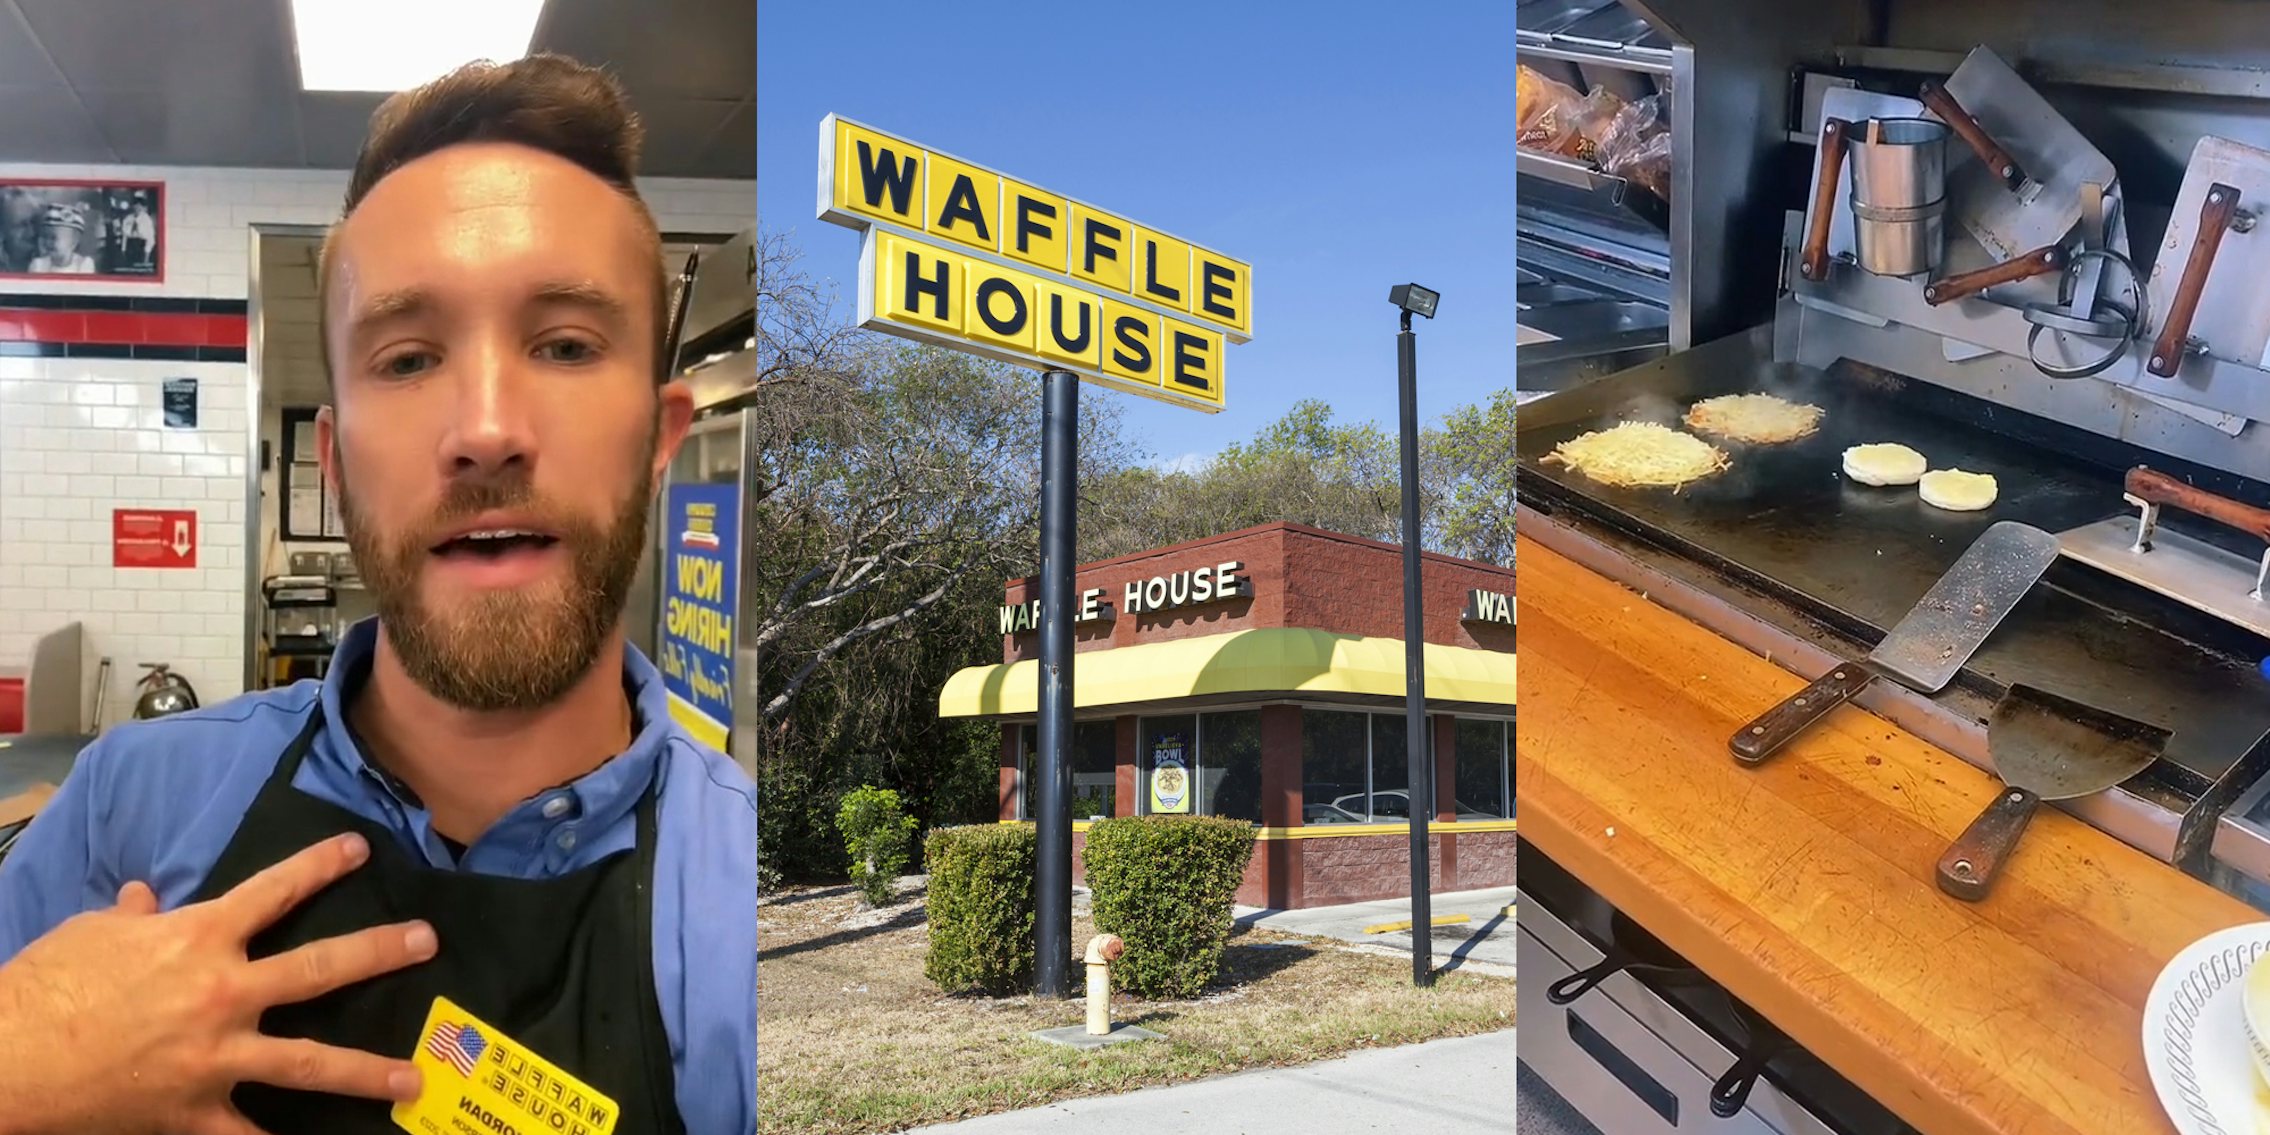 Waffle house worker speaking (l) Waffle House building with a sign out front (c) Waffle House worker cooking food on flat top (r)